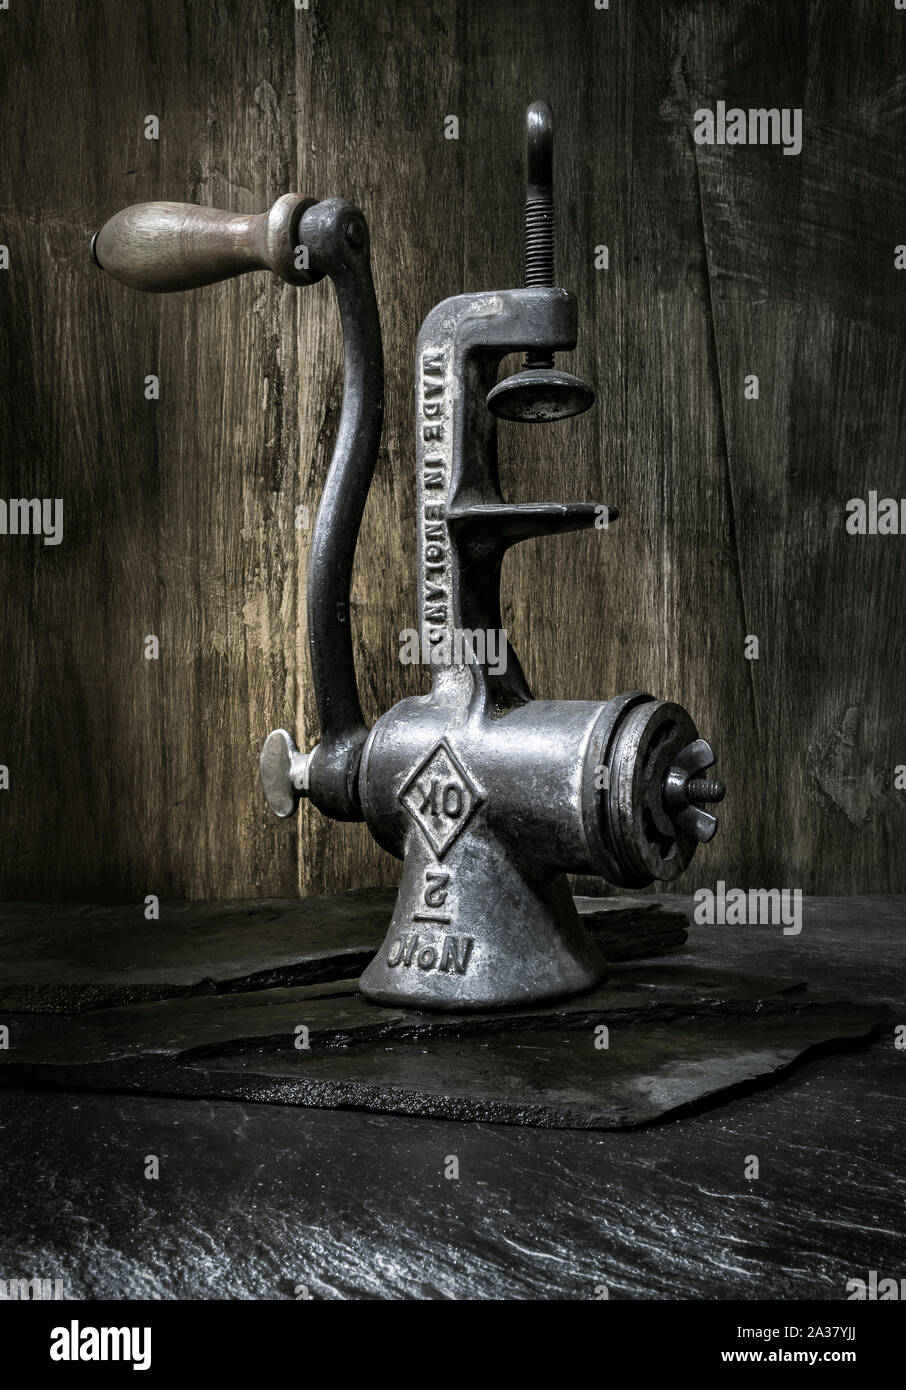 Vintage meat grinder still life. Old fashioned tools from the kitchen of  yesteryear Stock Photo - Alamy